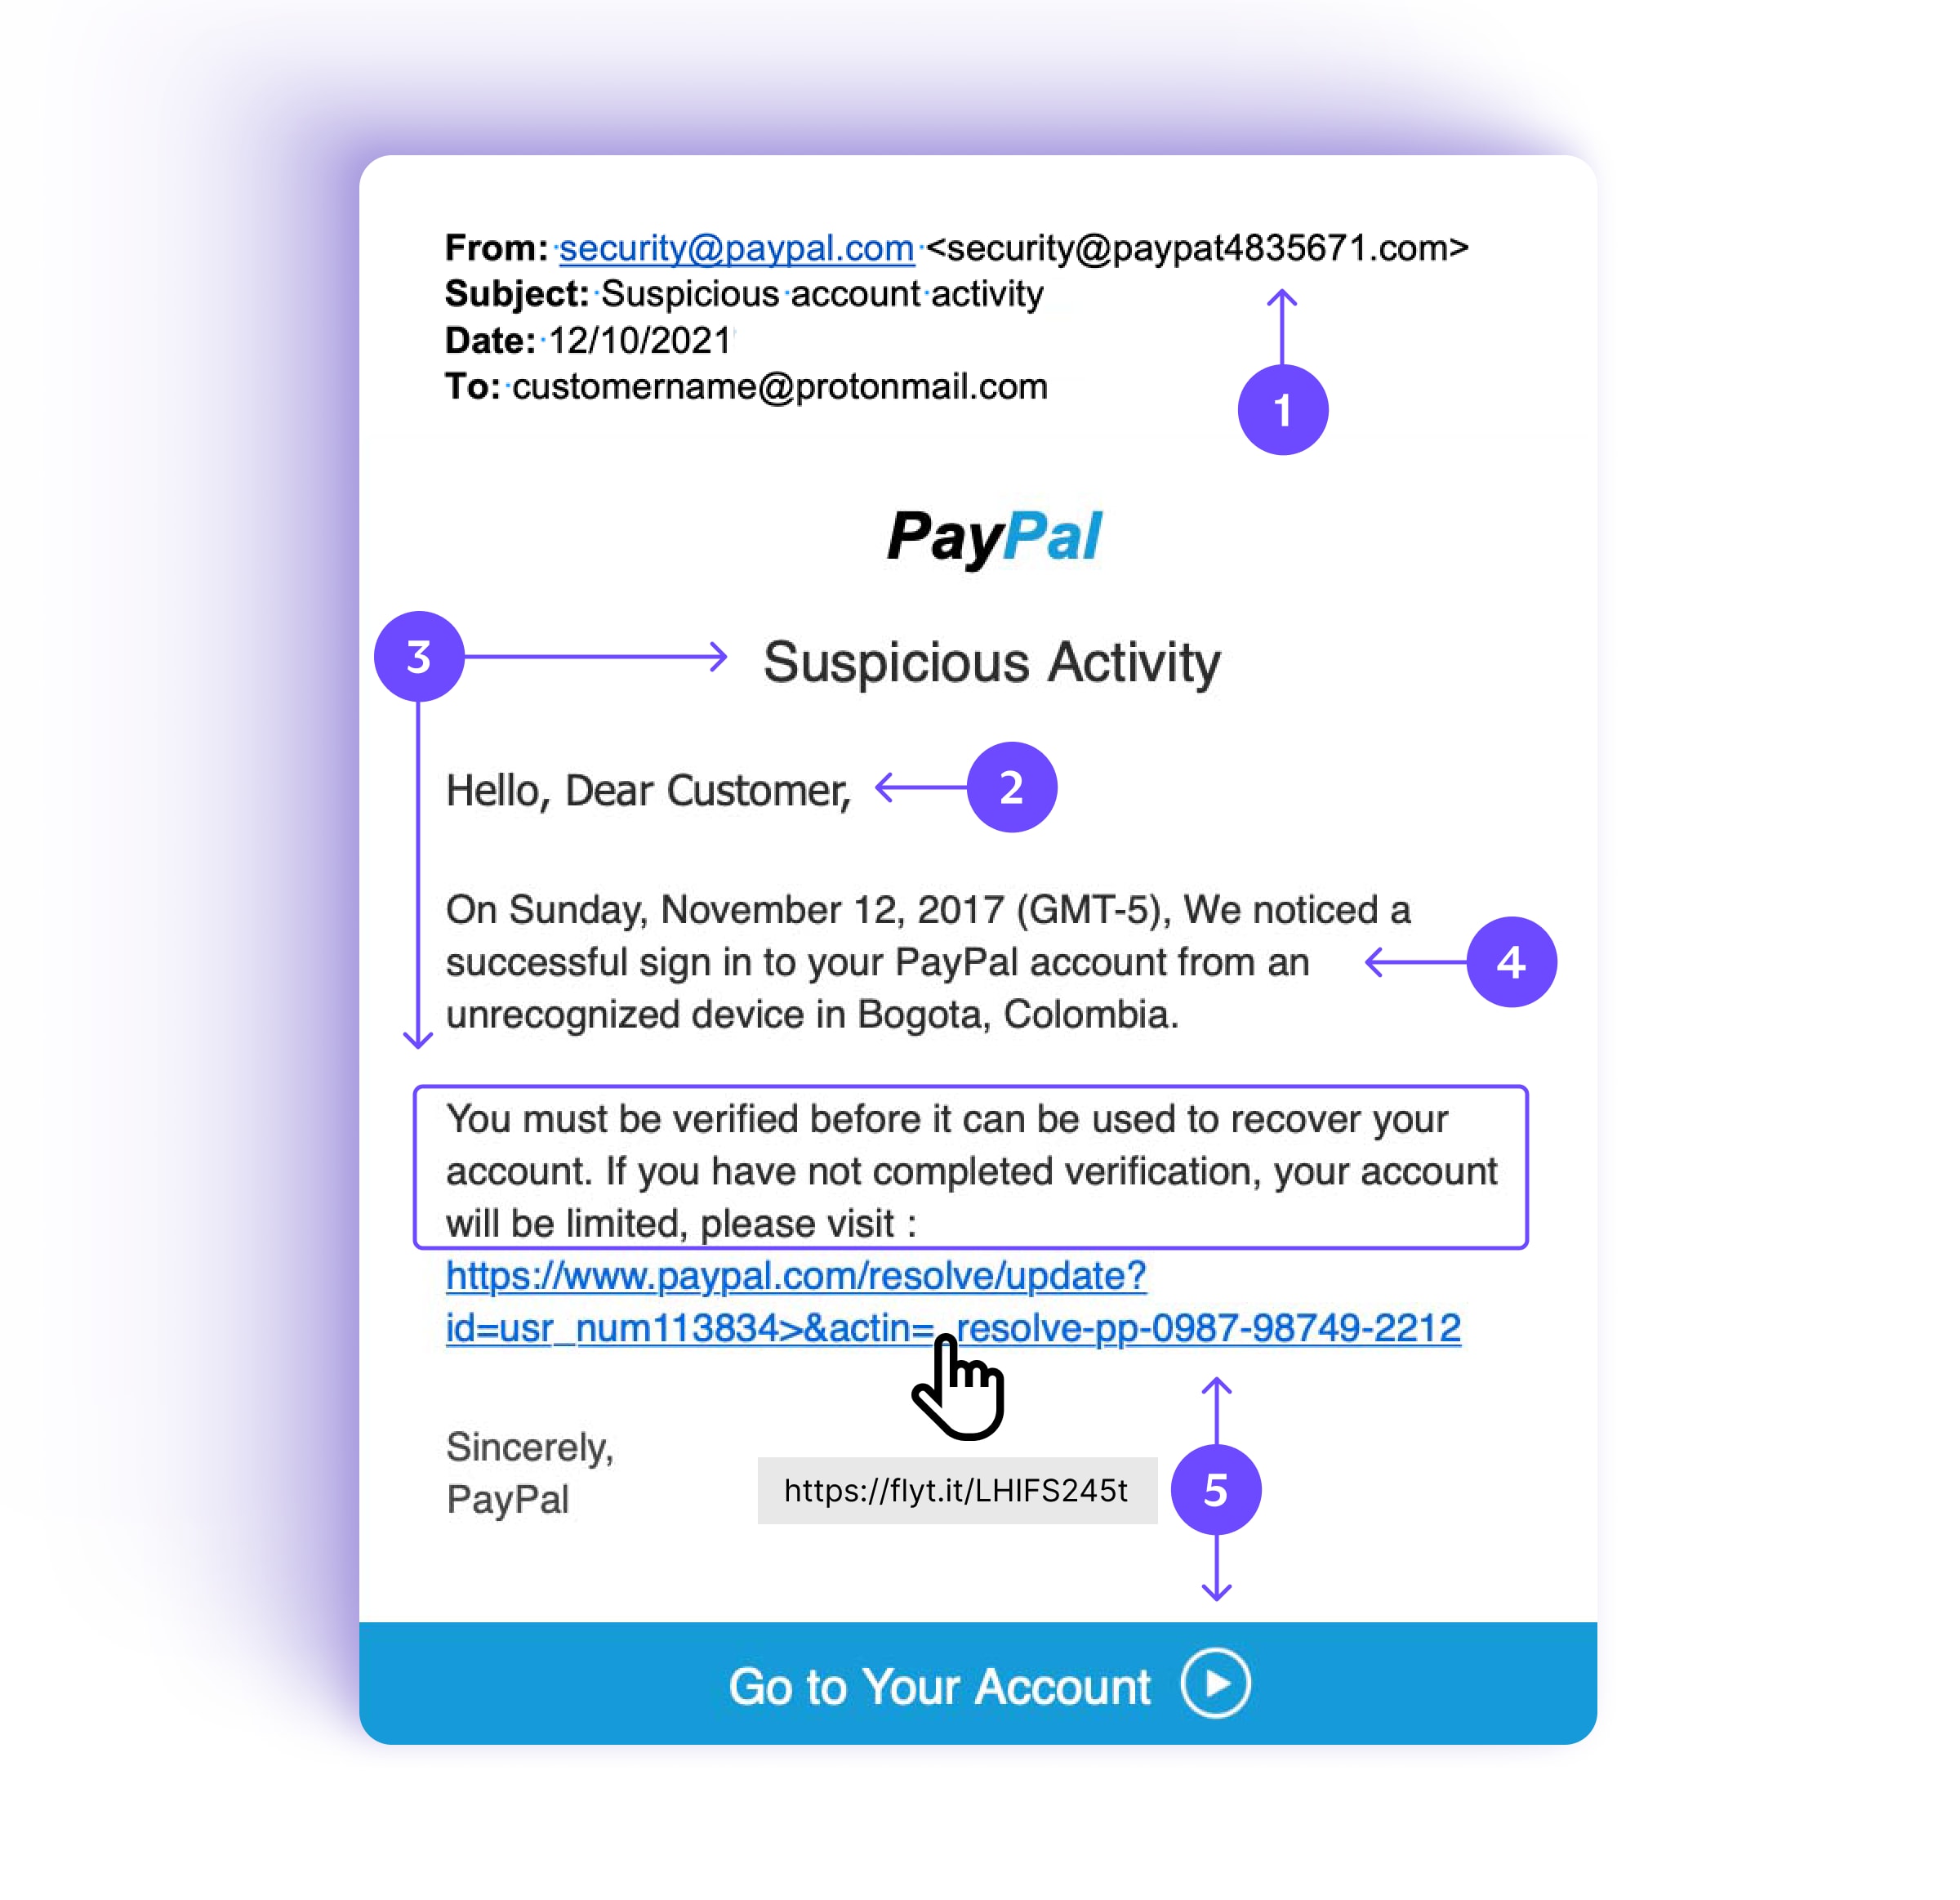 Phishing email example pretending to be from PayPal showing phishing red flags